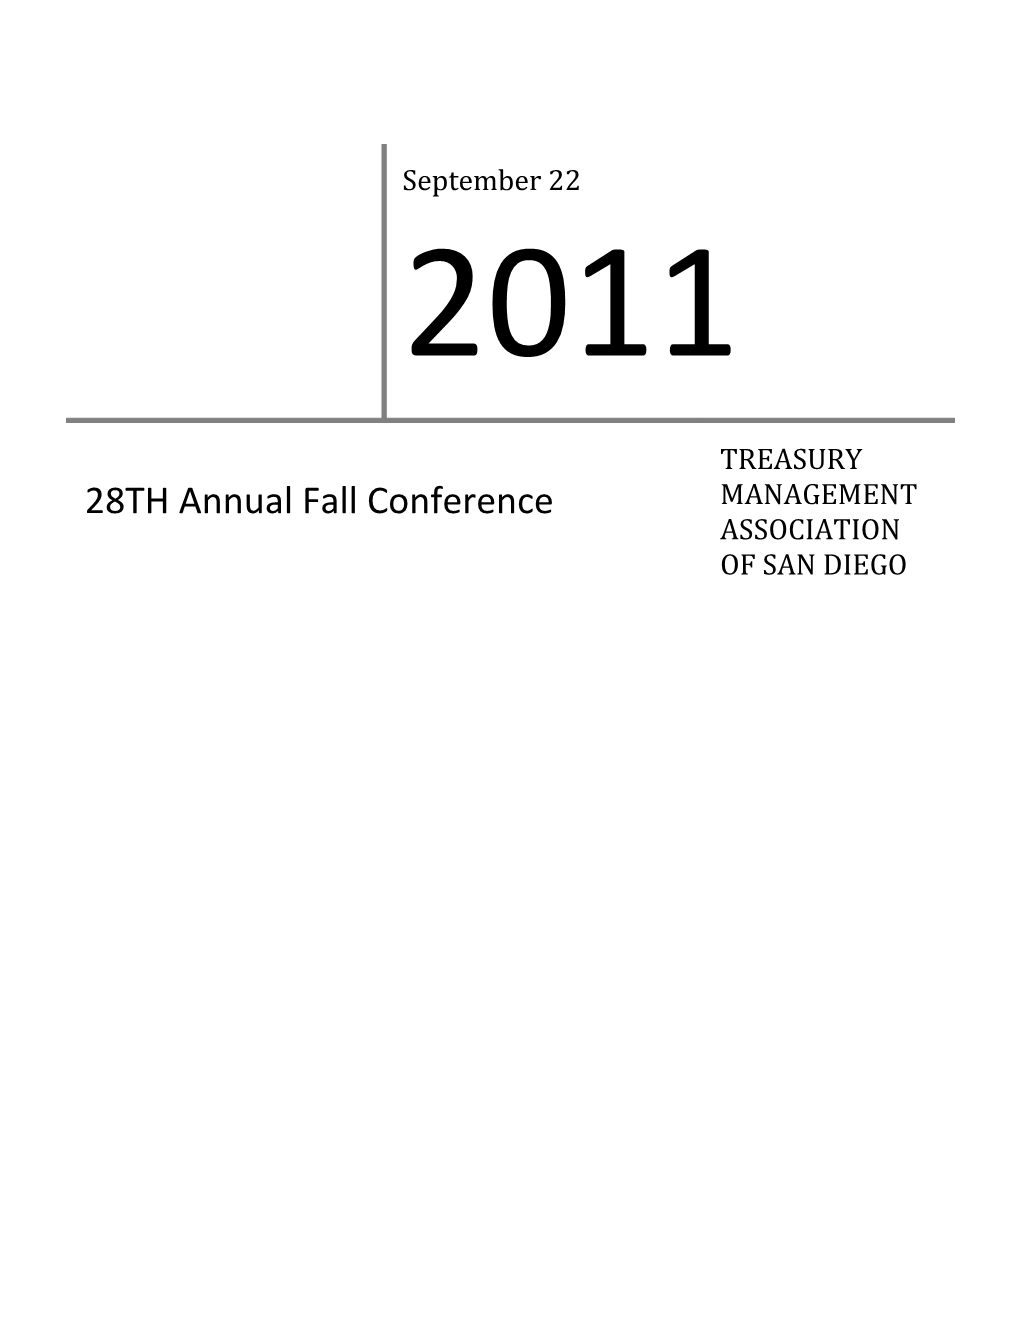 28Th ANNUAL FALL CONFERENCE